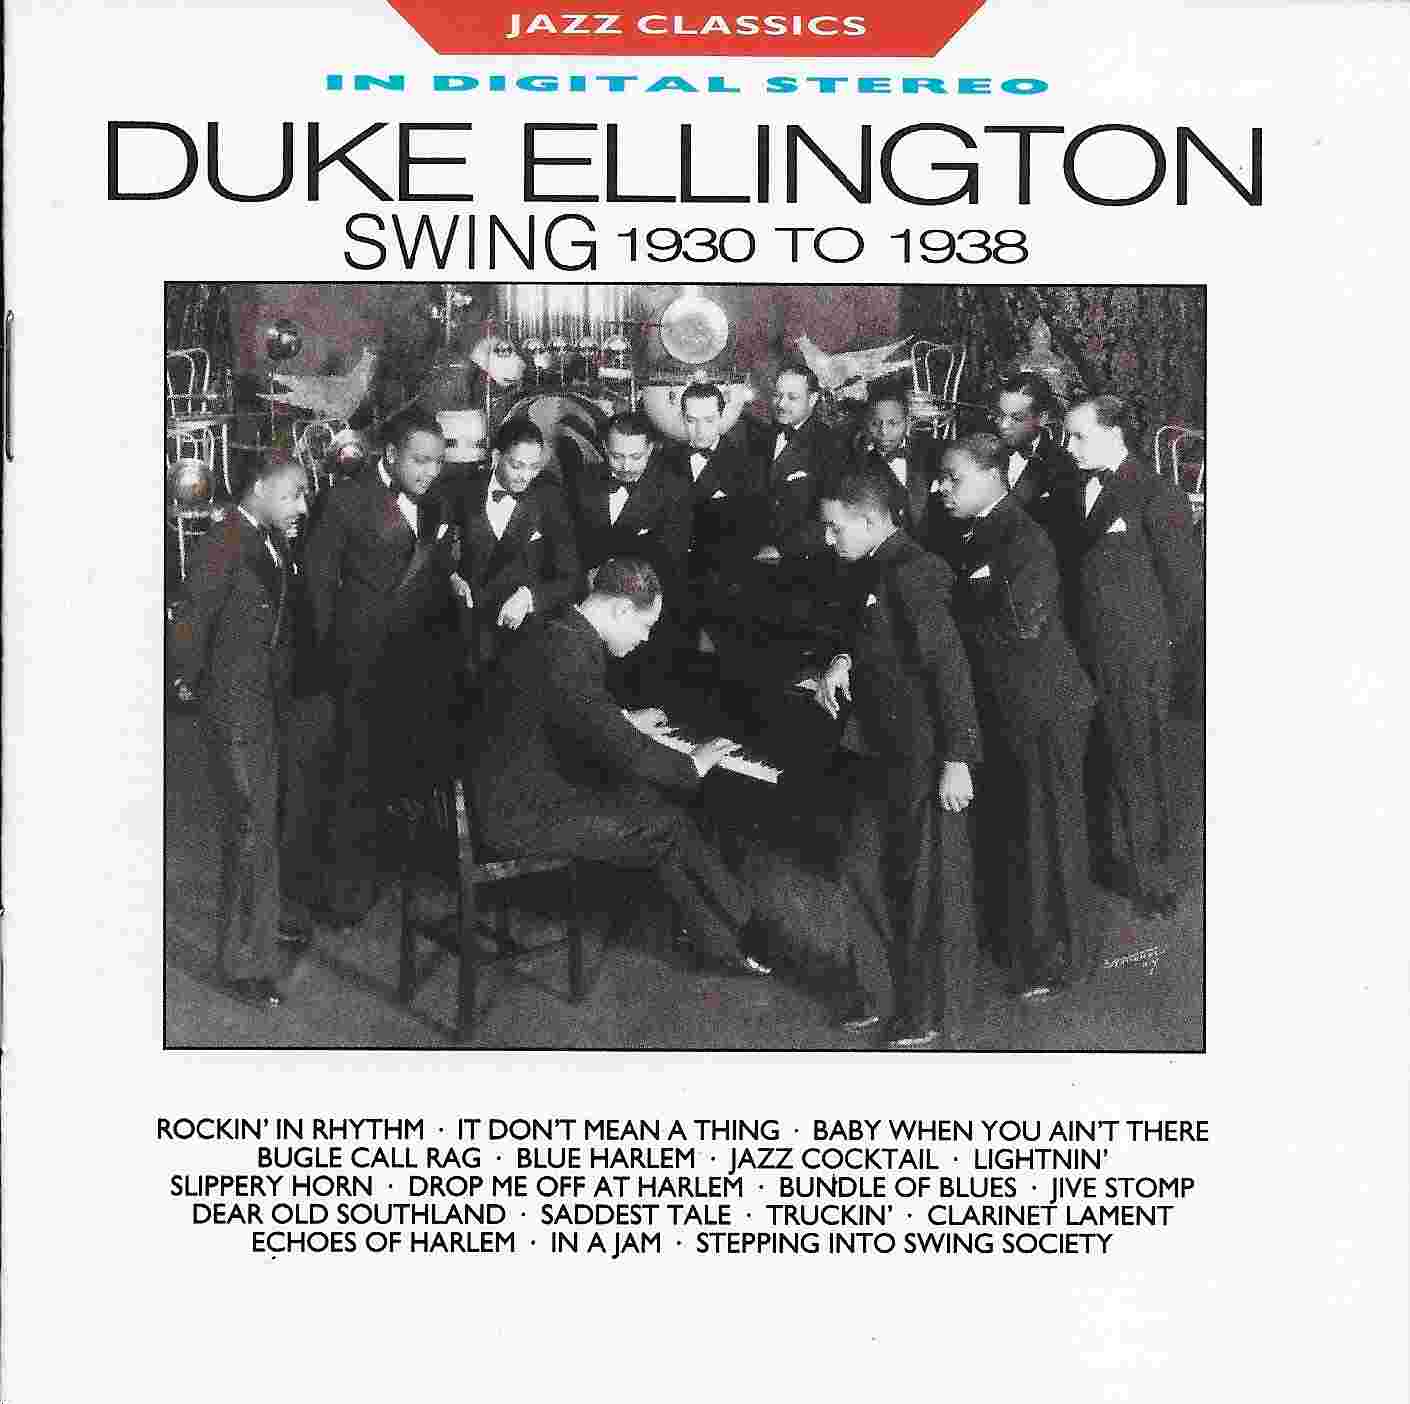 Picture of BBCCD686 Jazz classics - Duke Ellington by artist Duke Ellington from the BBC cds - Records and Tapes library